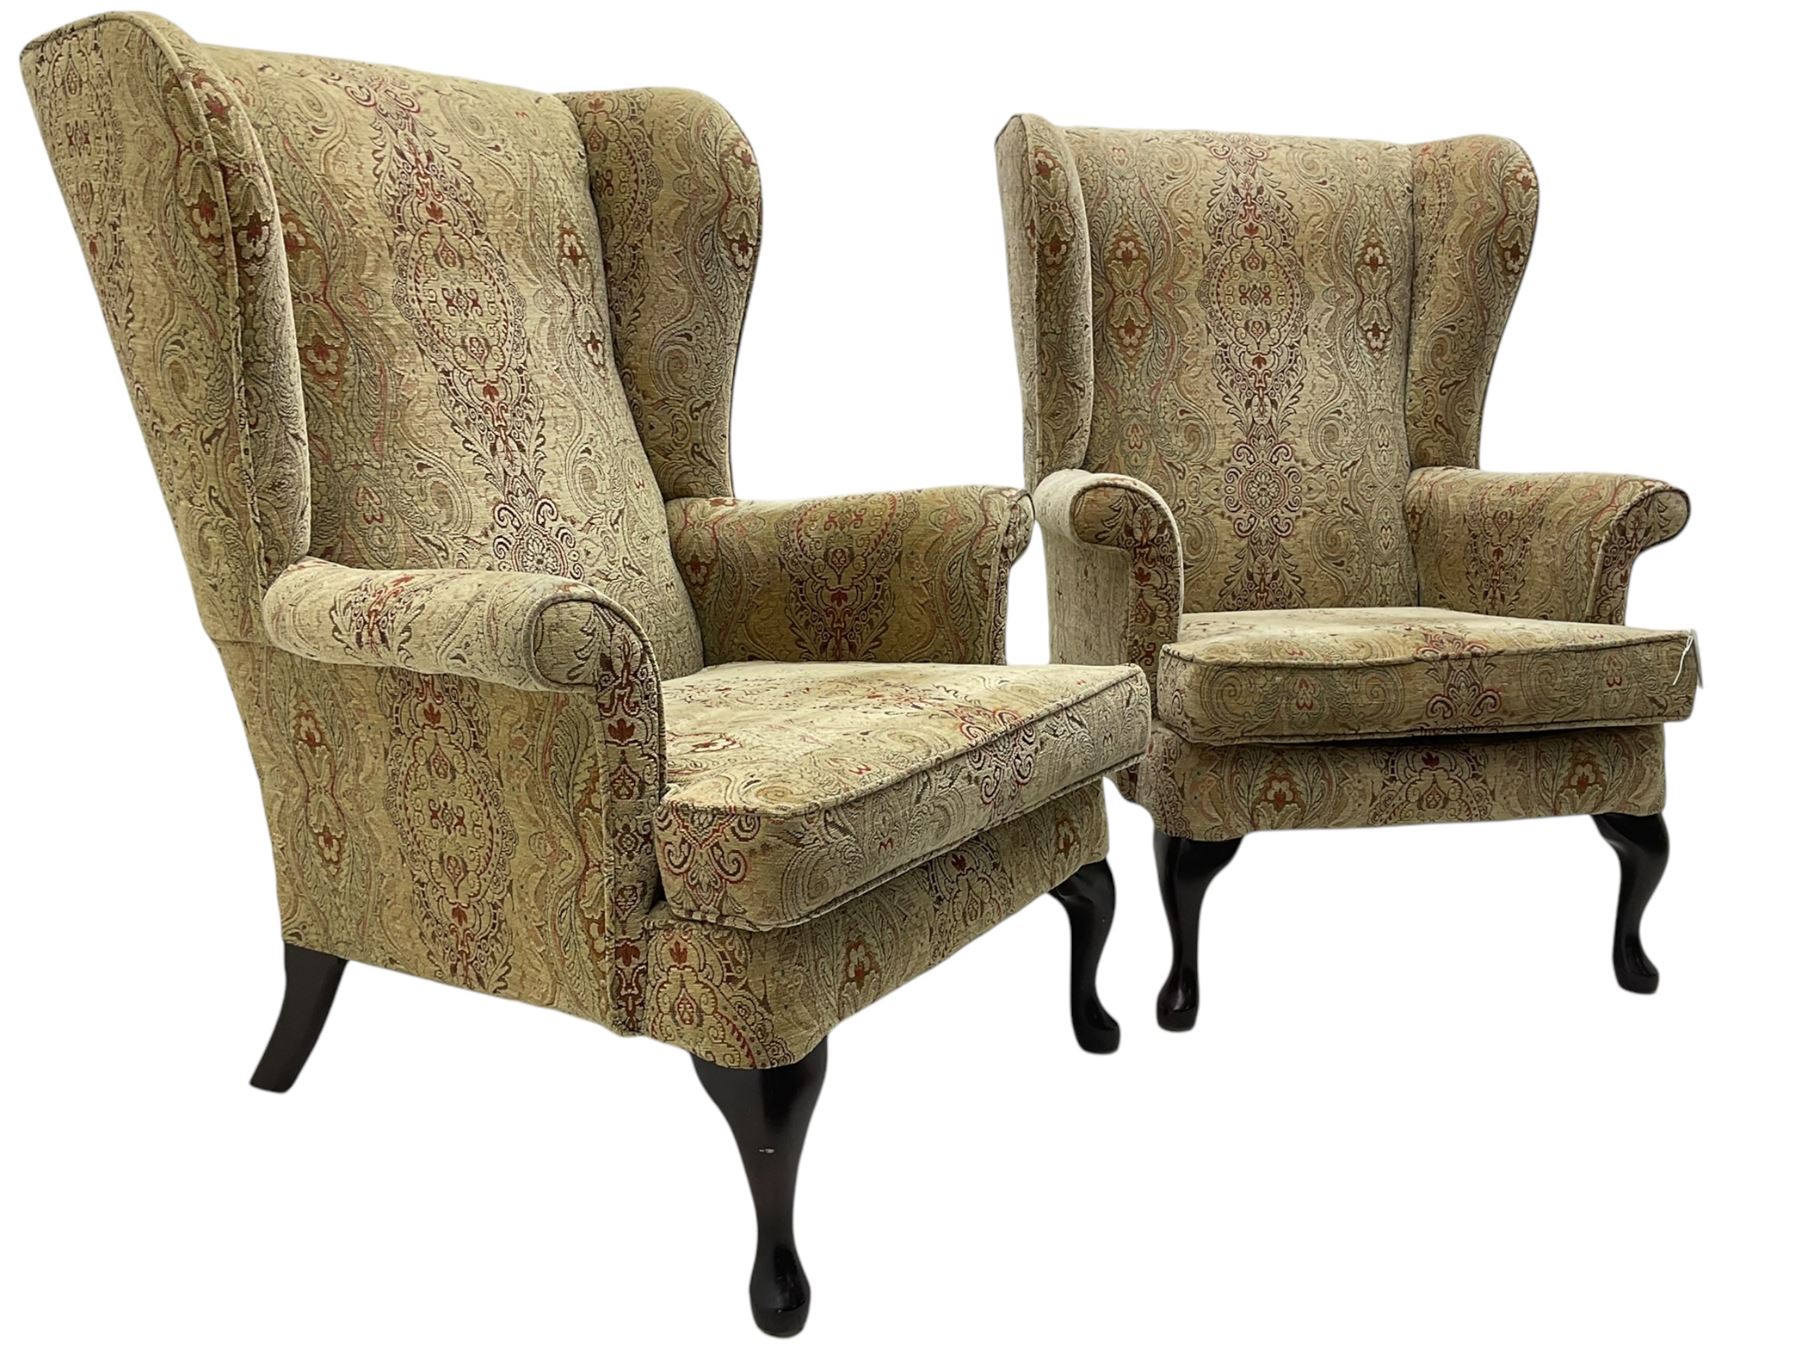 Parker Knoll - 'Burghley' pair of wingback armchairs - Image 5 of 5